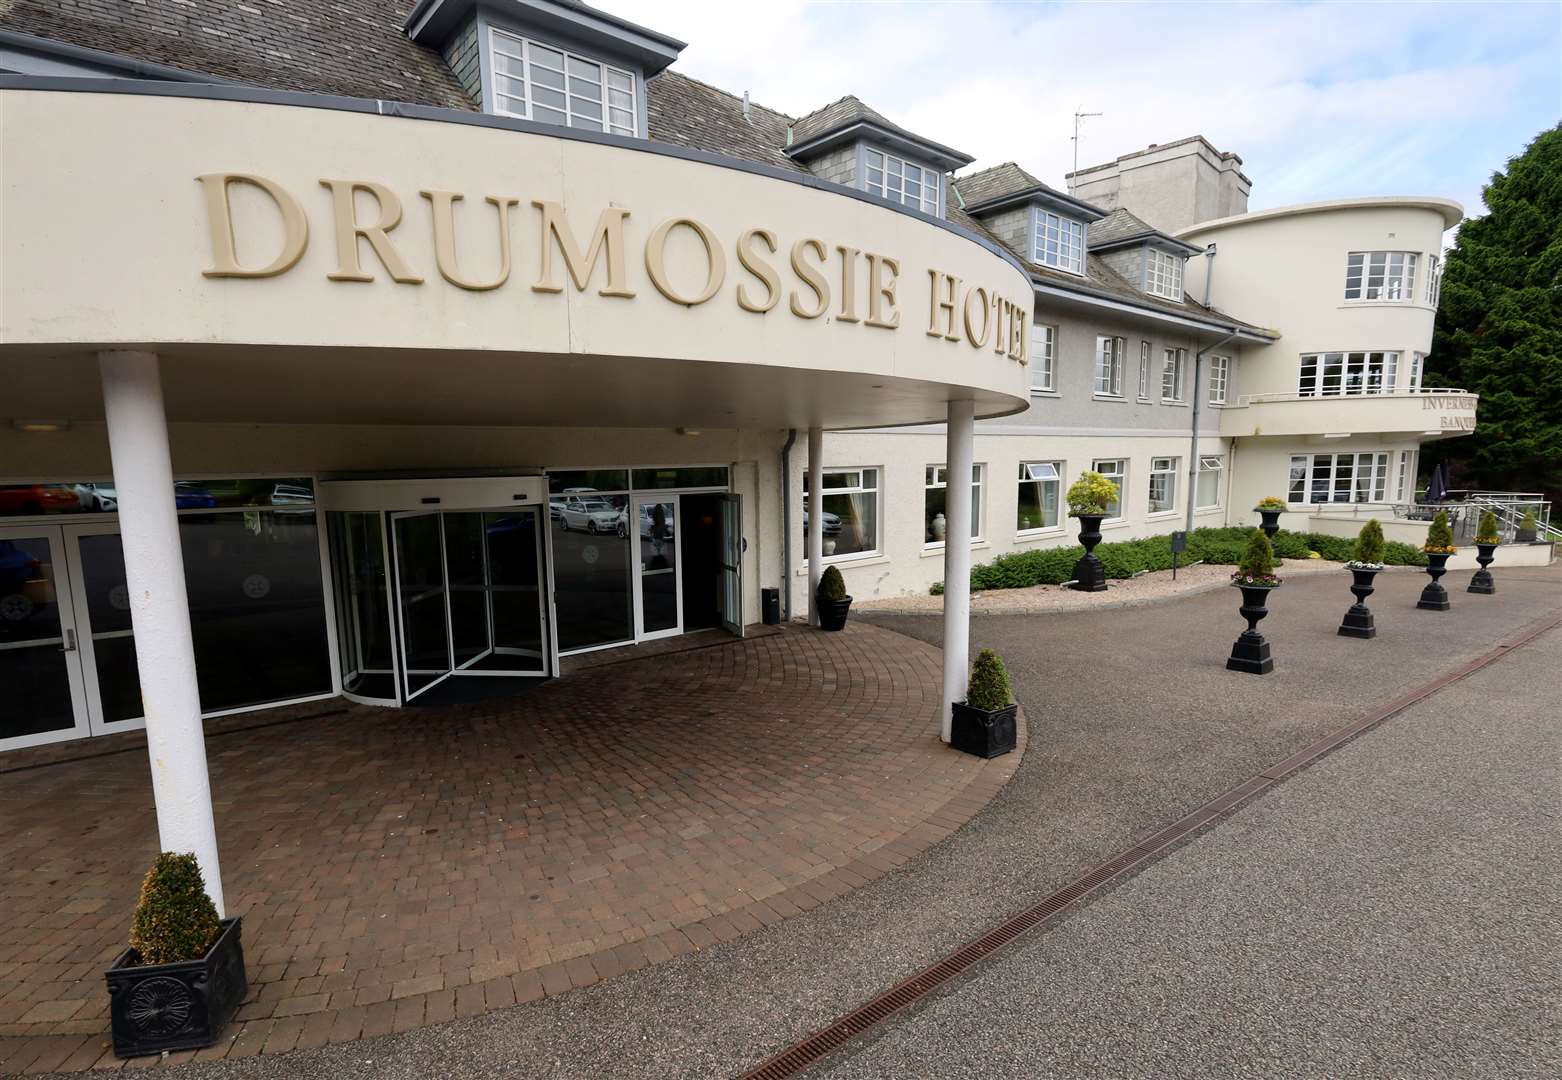 Drumossie Hotel where the awards ceremony was due to take place.